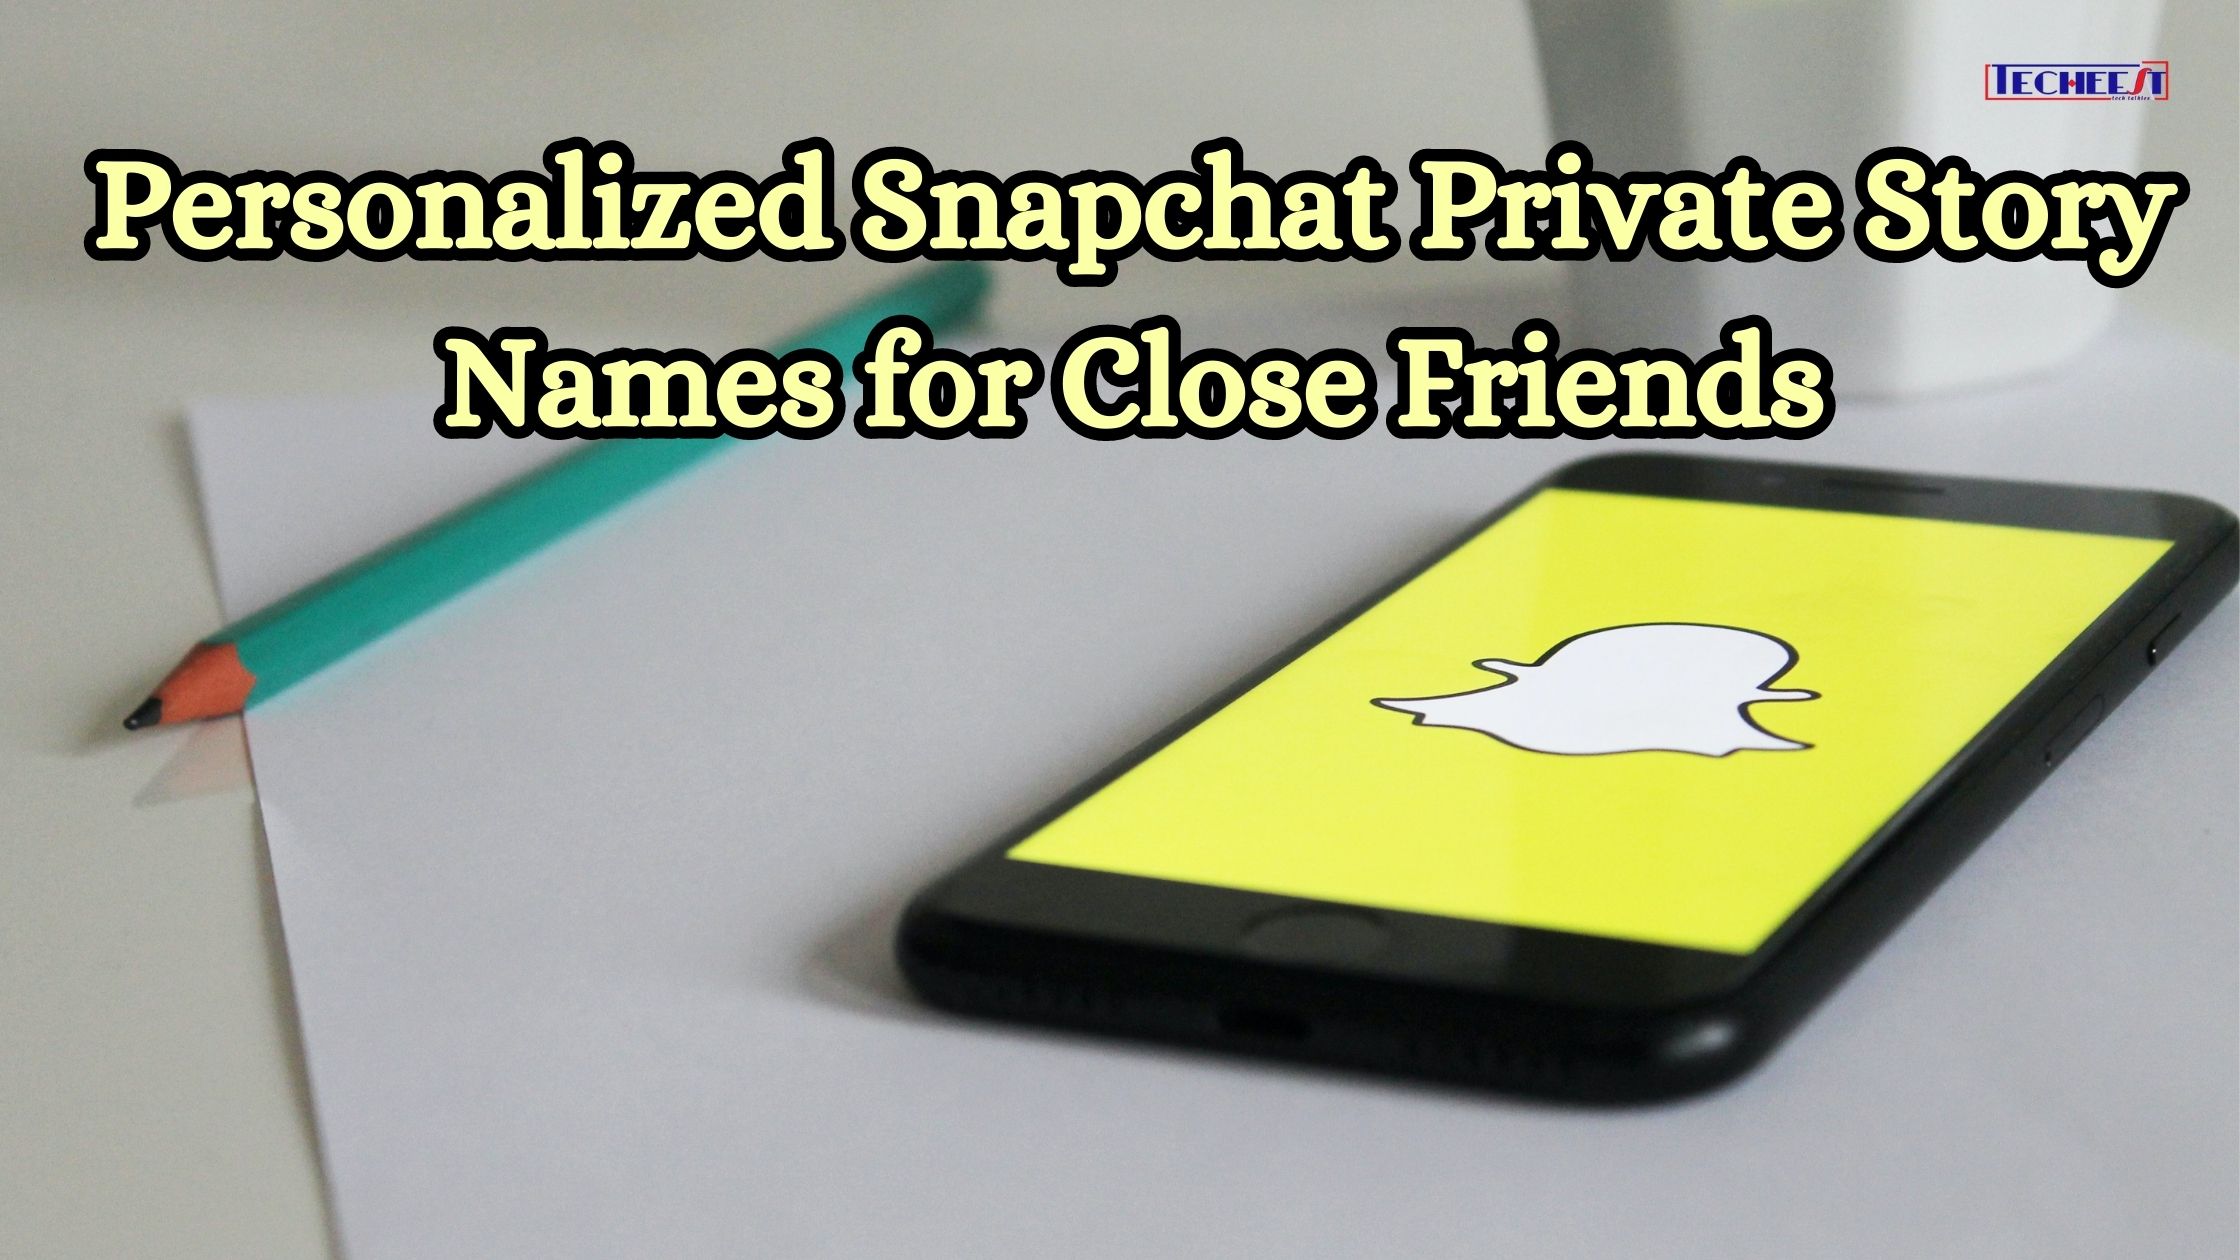 Personalized Snapchat Private Story Names for Close Friends